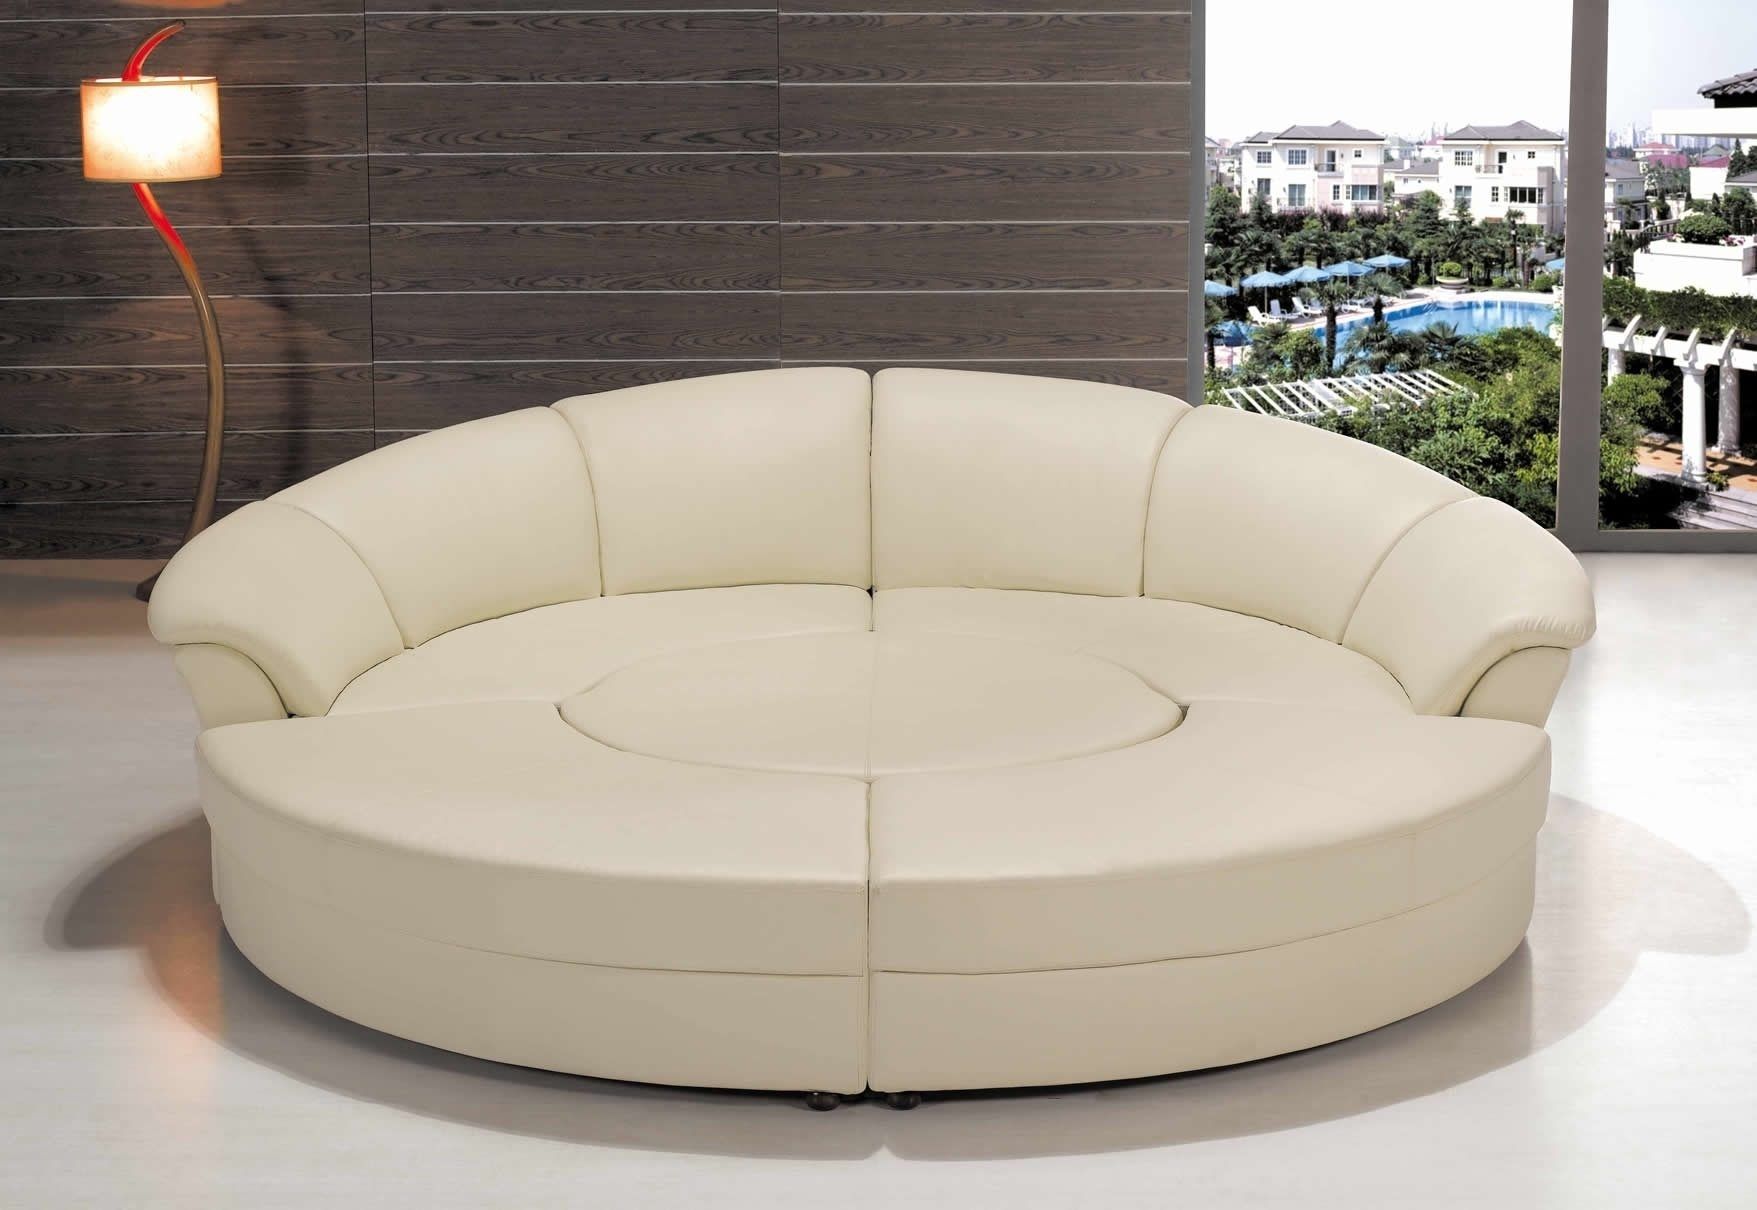 Photos Round Sectional Sofarcular Sofas Pros And Cons Modern Curved For Round Sectional Sofas (View 8 of 10)